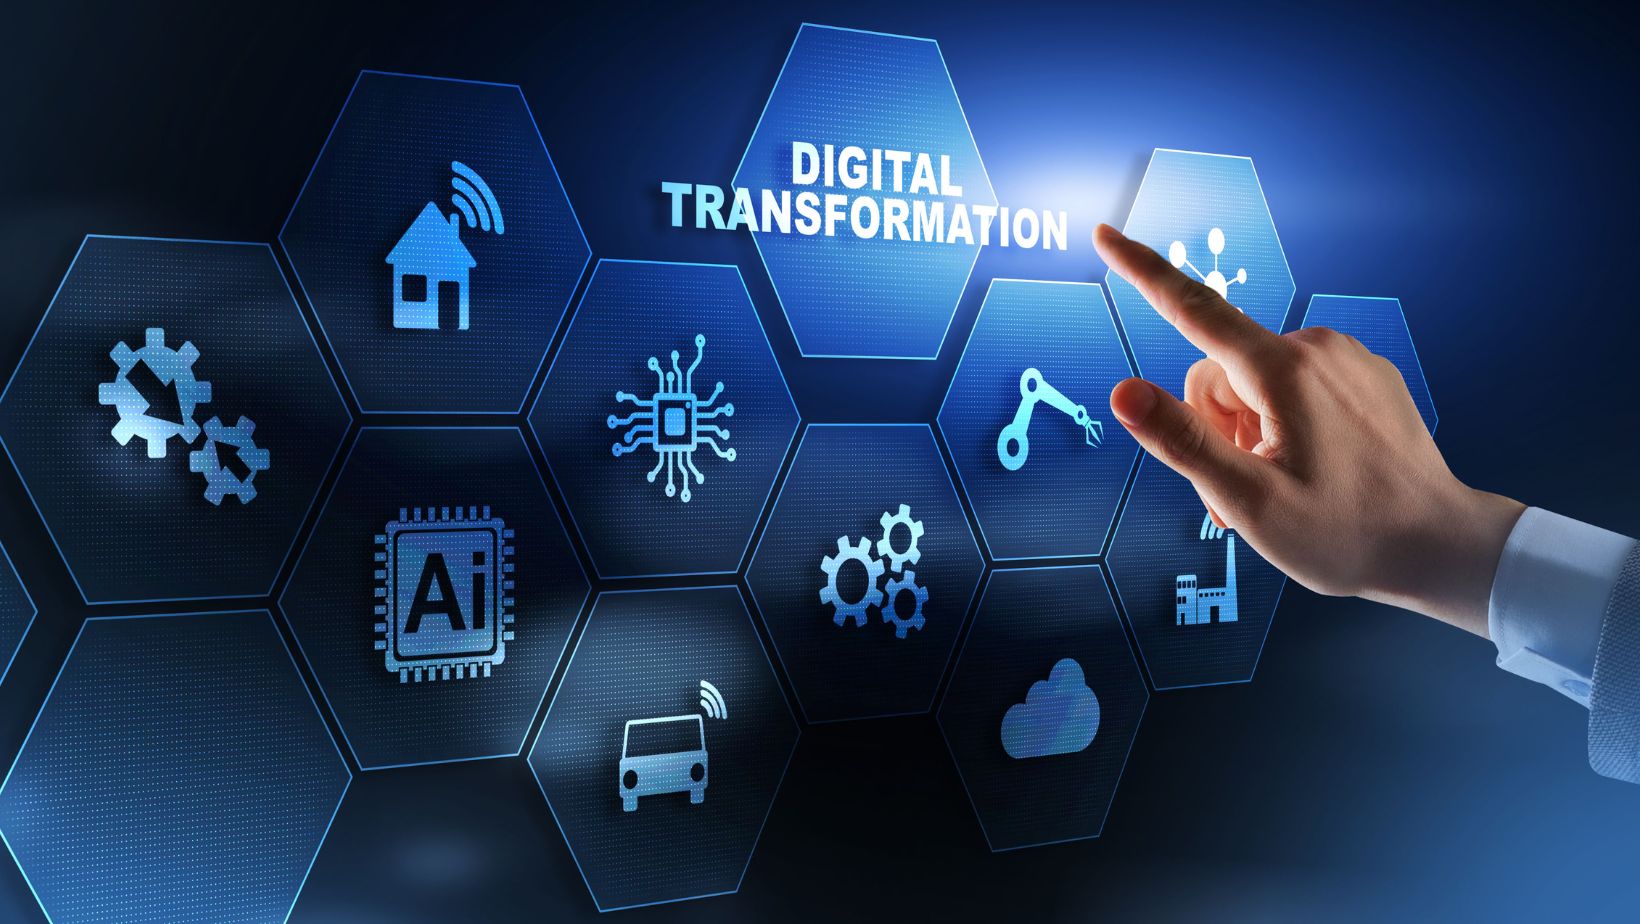 How Digital Transformation Can Help Your Business